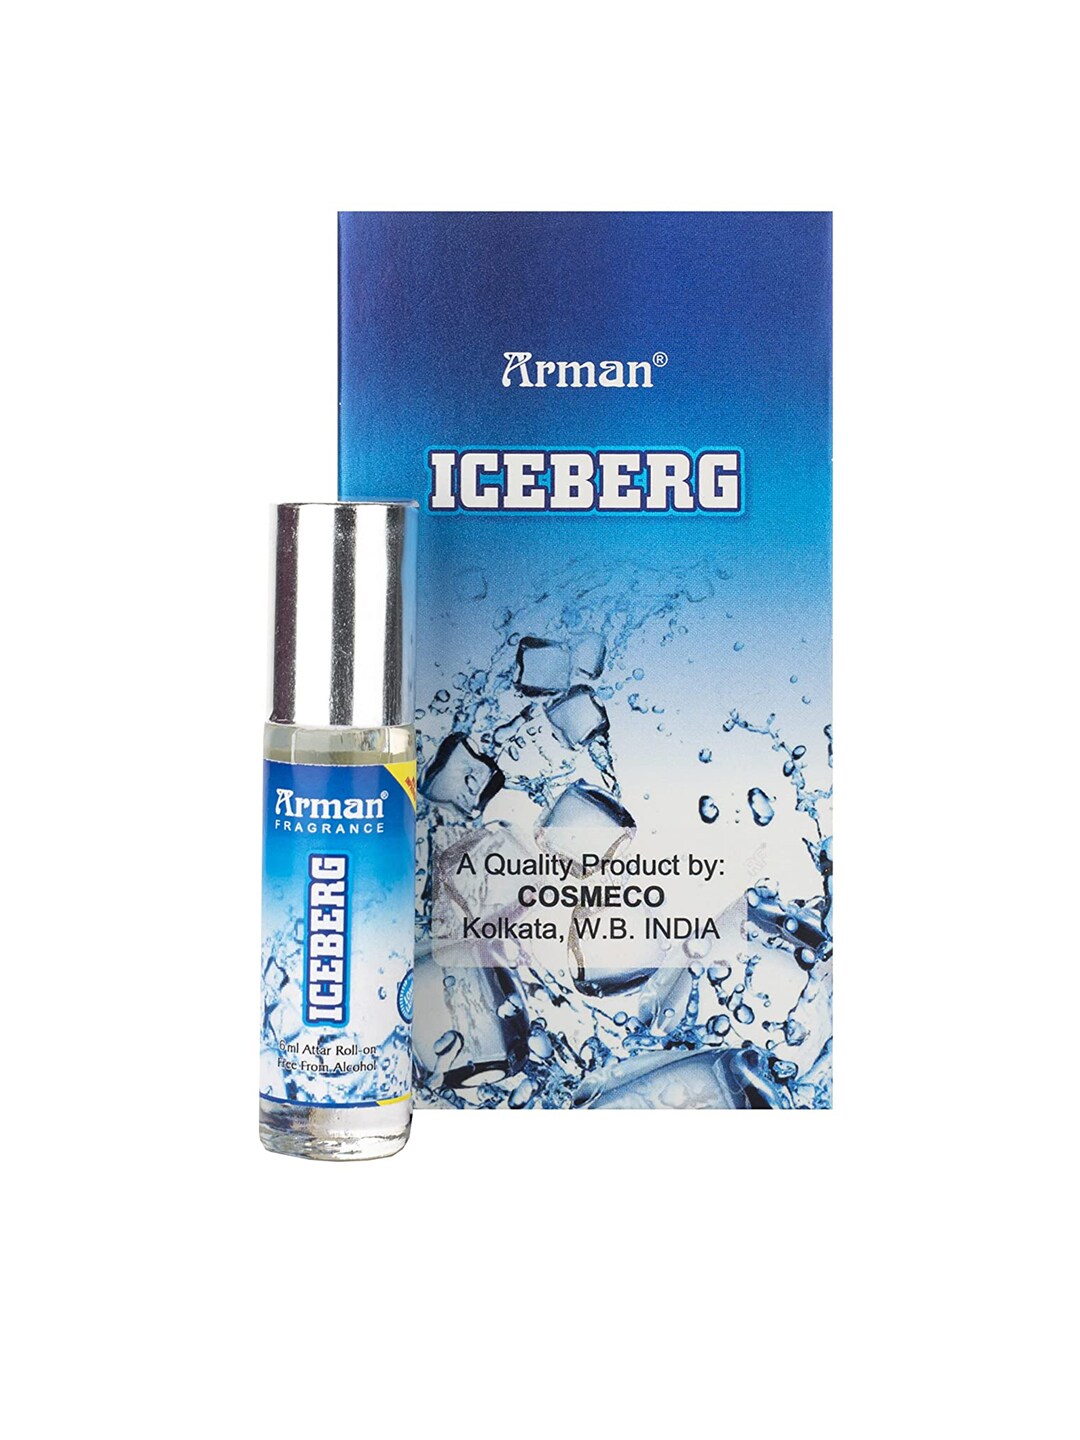 Arman Iceberg Natural Attar Roll-On - 6ml Price in India